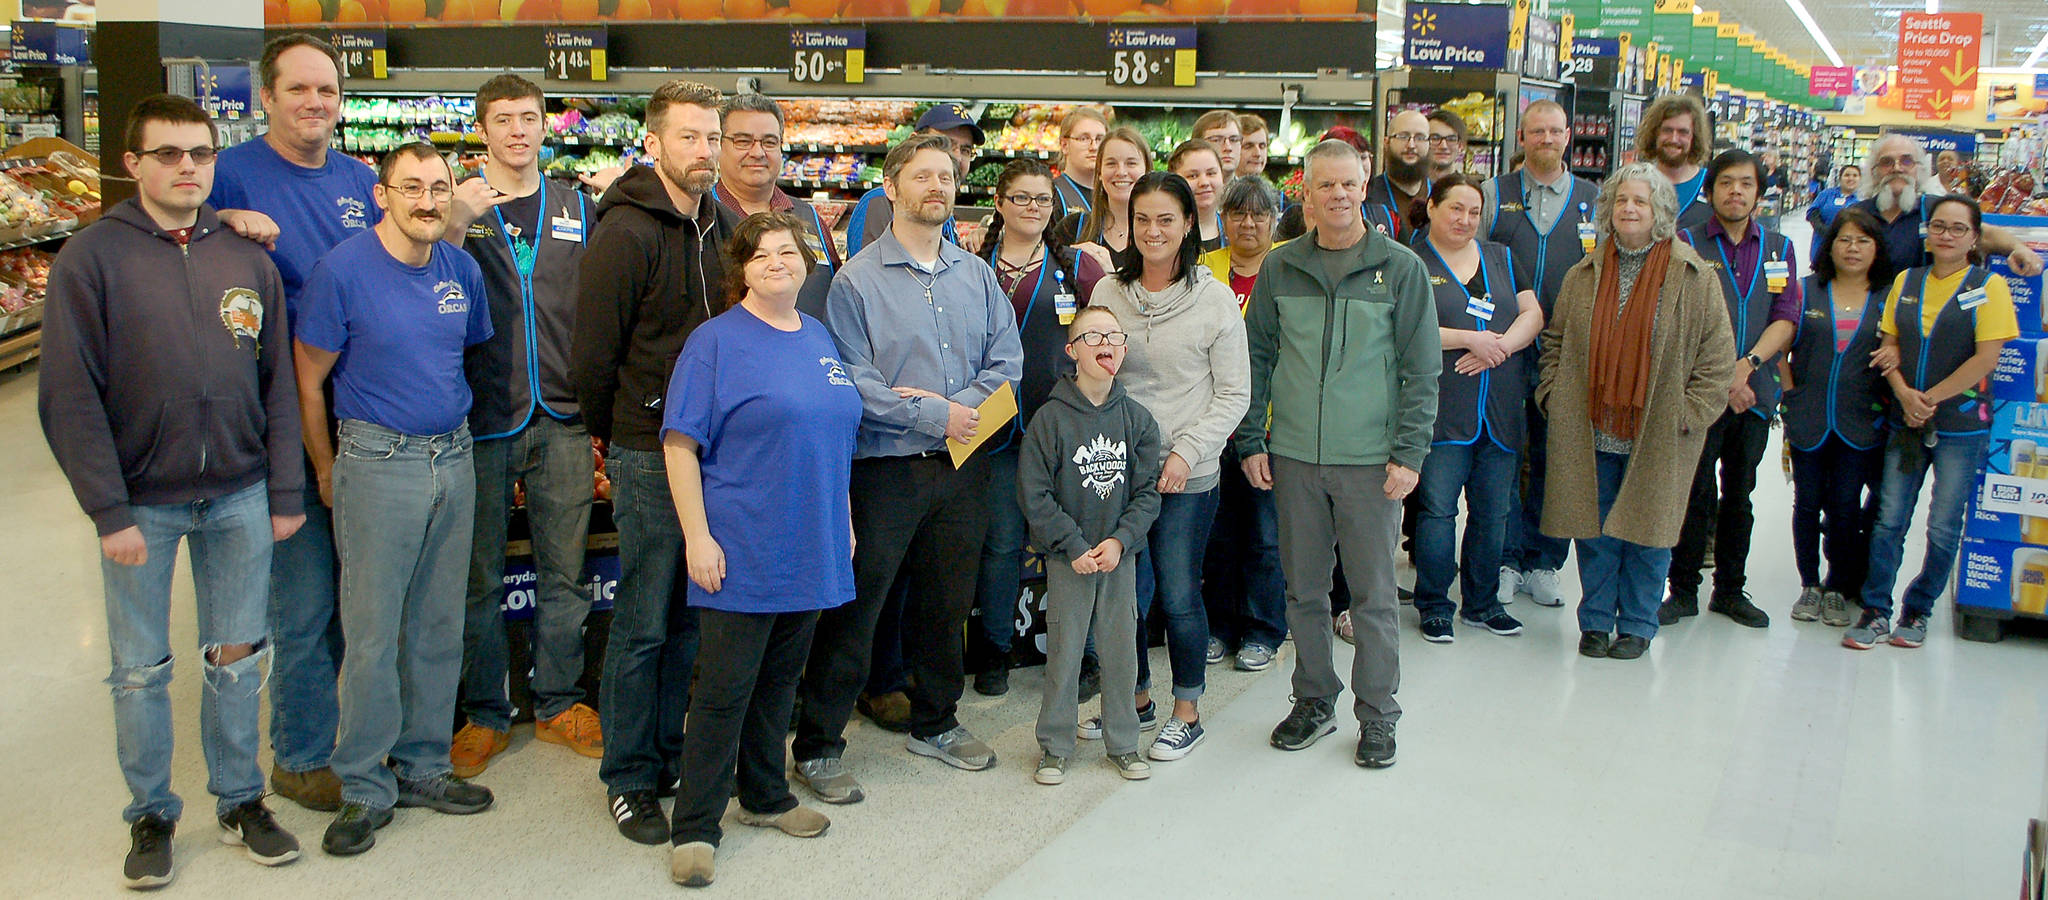 Members of the Clallam County Special Olympics group (left) and Catherine McKinney of Clallam County Mosaic (sixth from right) stand with employees of the Sequim Walmart as they receive donations from Rob Nichols (eighth from left) of the Knights of Columbus from the Tootsie Roll Drive fundraiser in November. Sequim Gazette photo by Conor Dowley